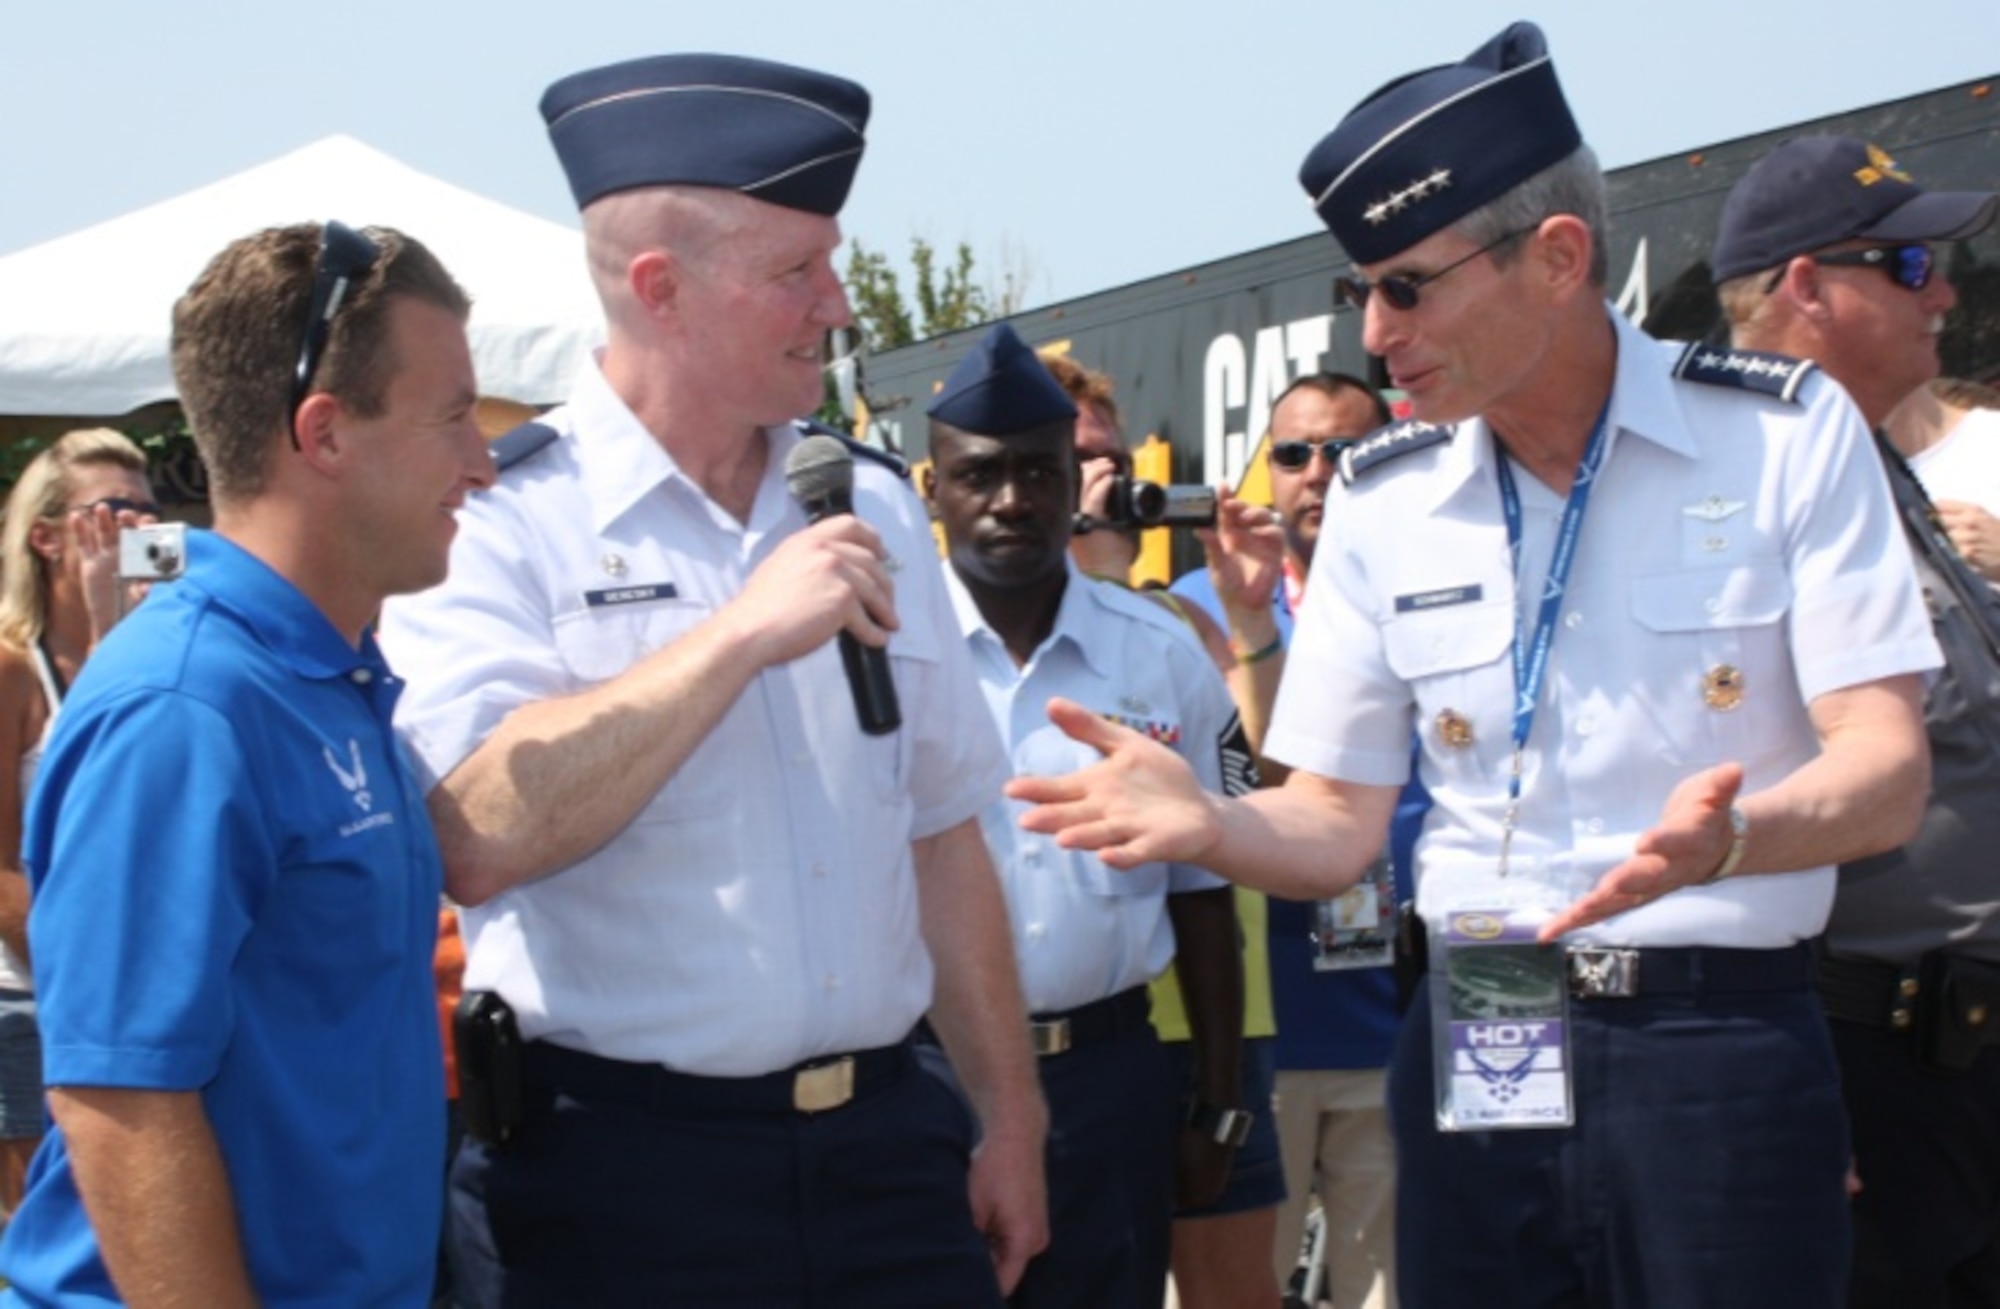 Air Force Chief of Staff Gen. Norton Schwartz and A.J. Allmendinger, NASCAR driver for the Air Force-sponsored #43 car (far left), are introduced to delayed enlisted members and their families by Lt. Col. John Deresky, 336th Recruiting Squadron commander. Schwartz spoke to the large crowd and 24 local delayed enlisted members at the Coke Zero 400 in Daytona Beach, Fla., July 2, 2011.  (U.S. Air Force photo/Capt. Maggie M. Silva)